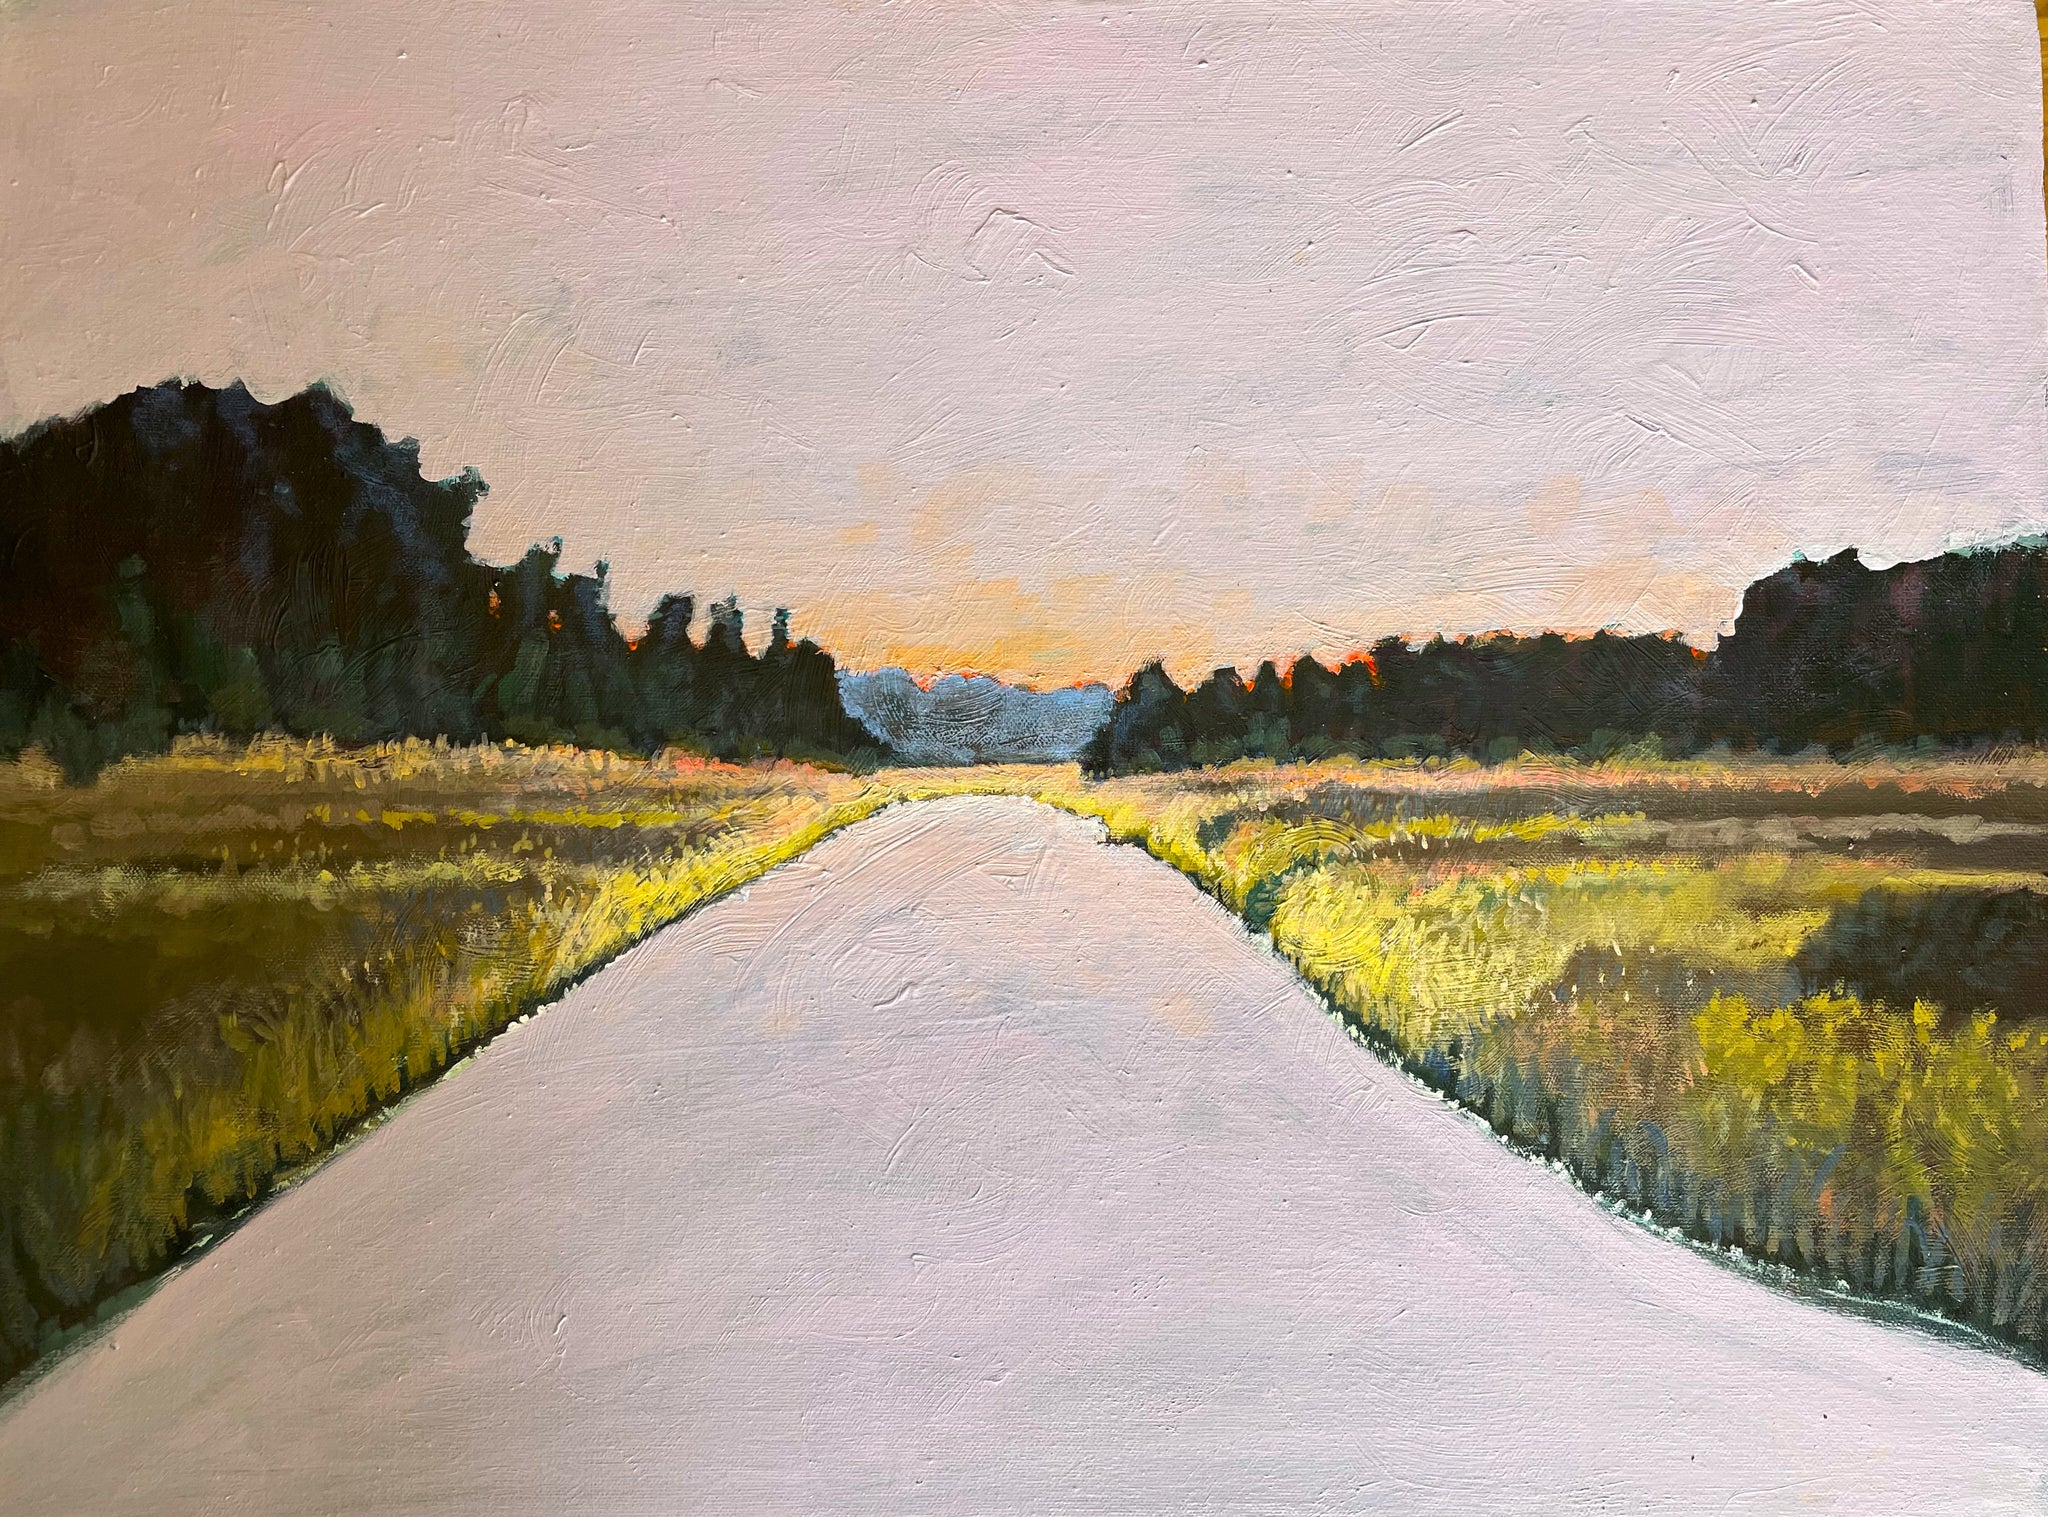 Cheehaw Combahee headwaters as dusk approaches  16 X 20"